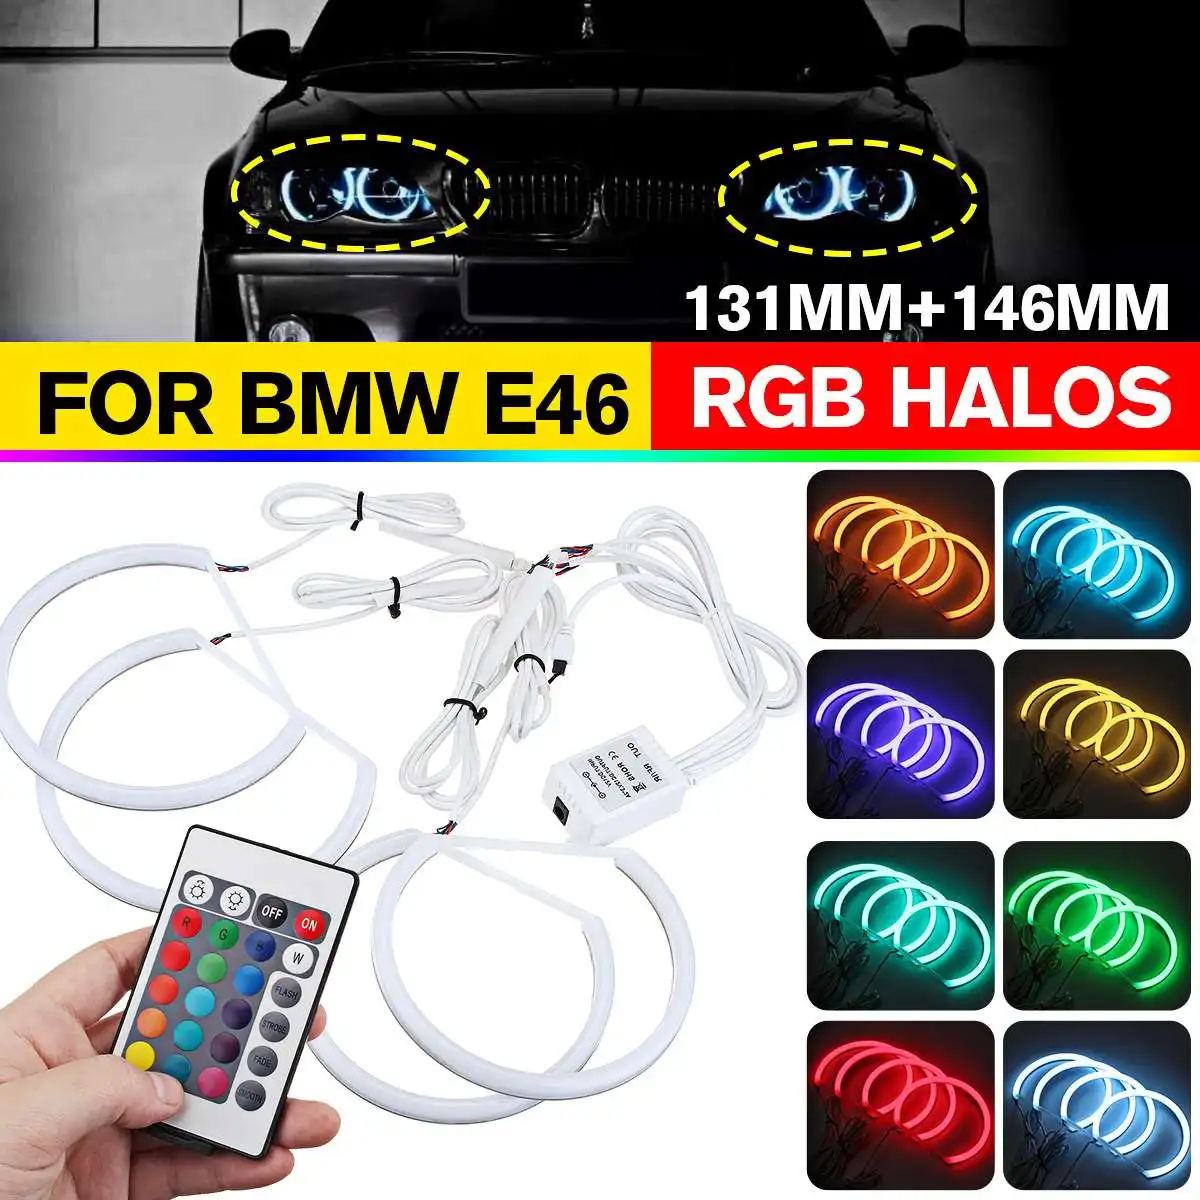 

2*131mm and 2*146mm Cotton halo ring kit RGB Angel eyes Remote control A+B Non projector 4D 16colors flash for BMW E46